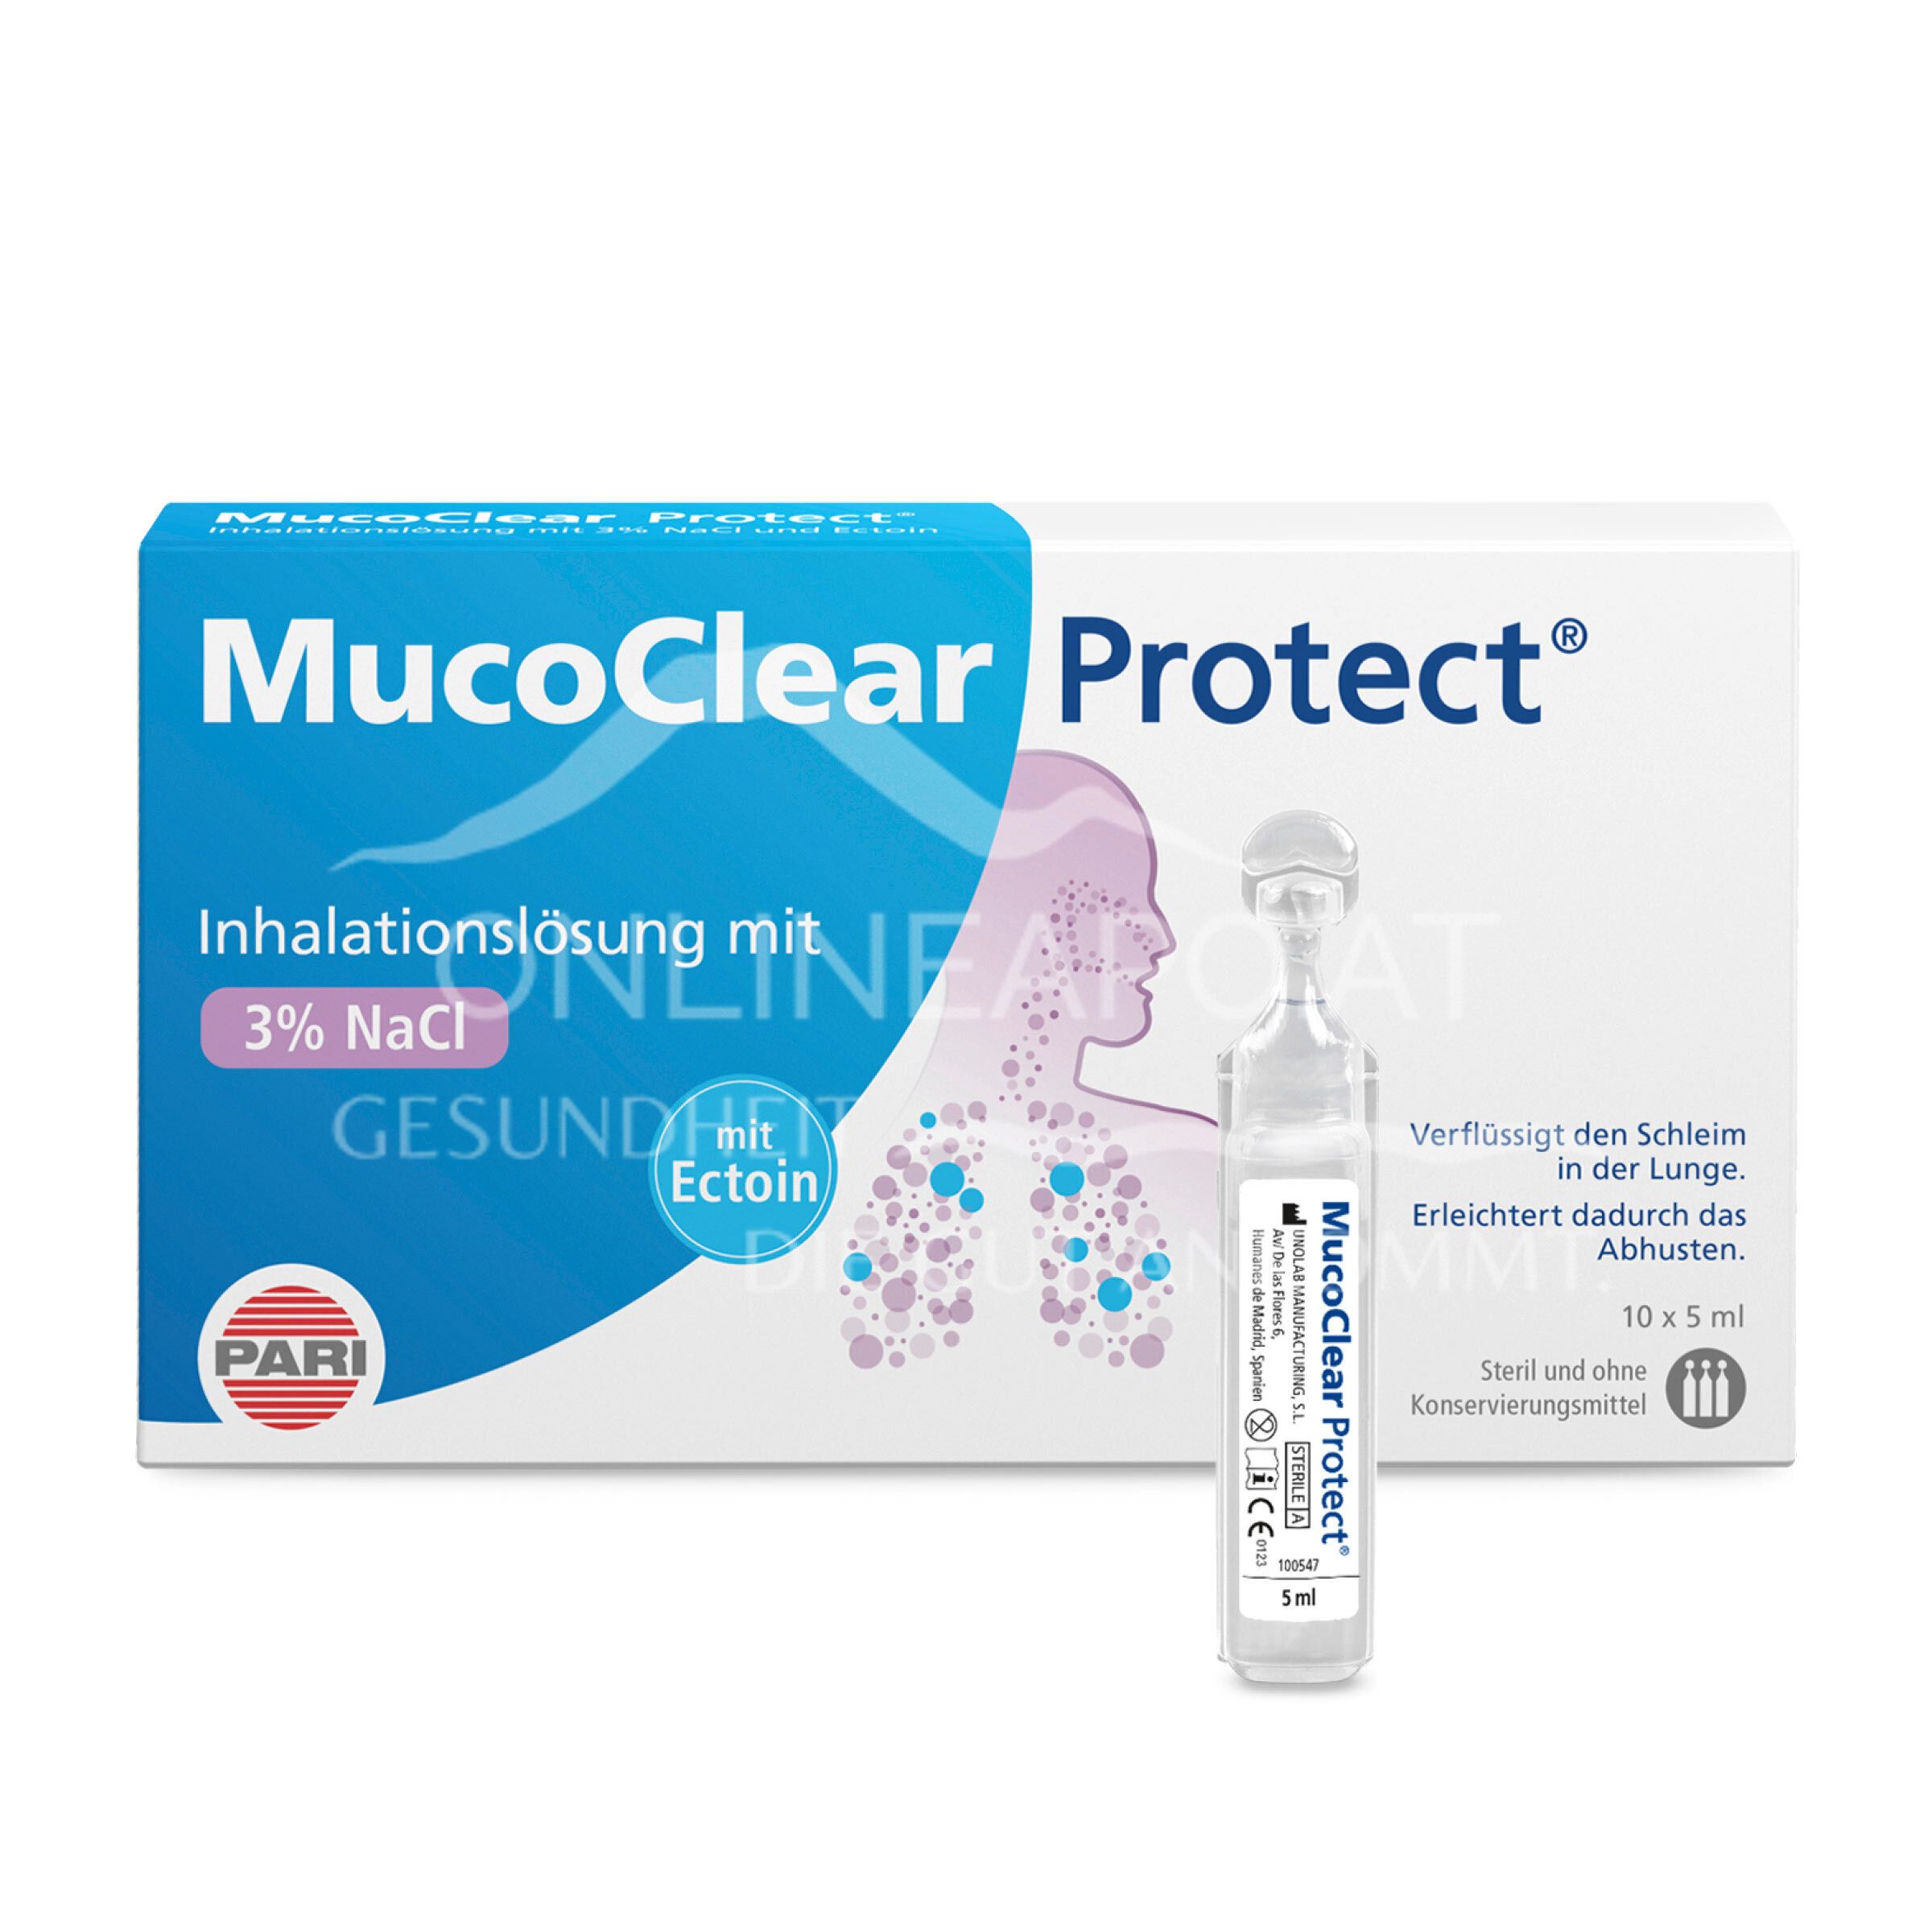 MucoClear Protect 3% NaCl 10 x 5 ml